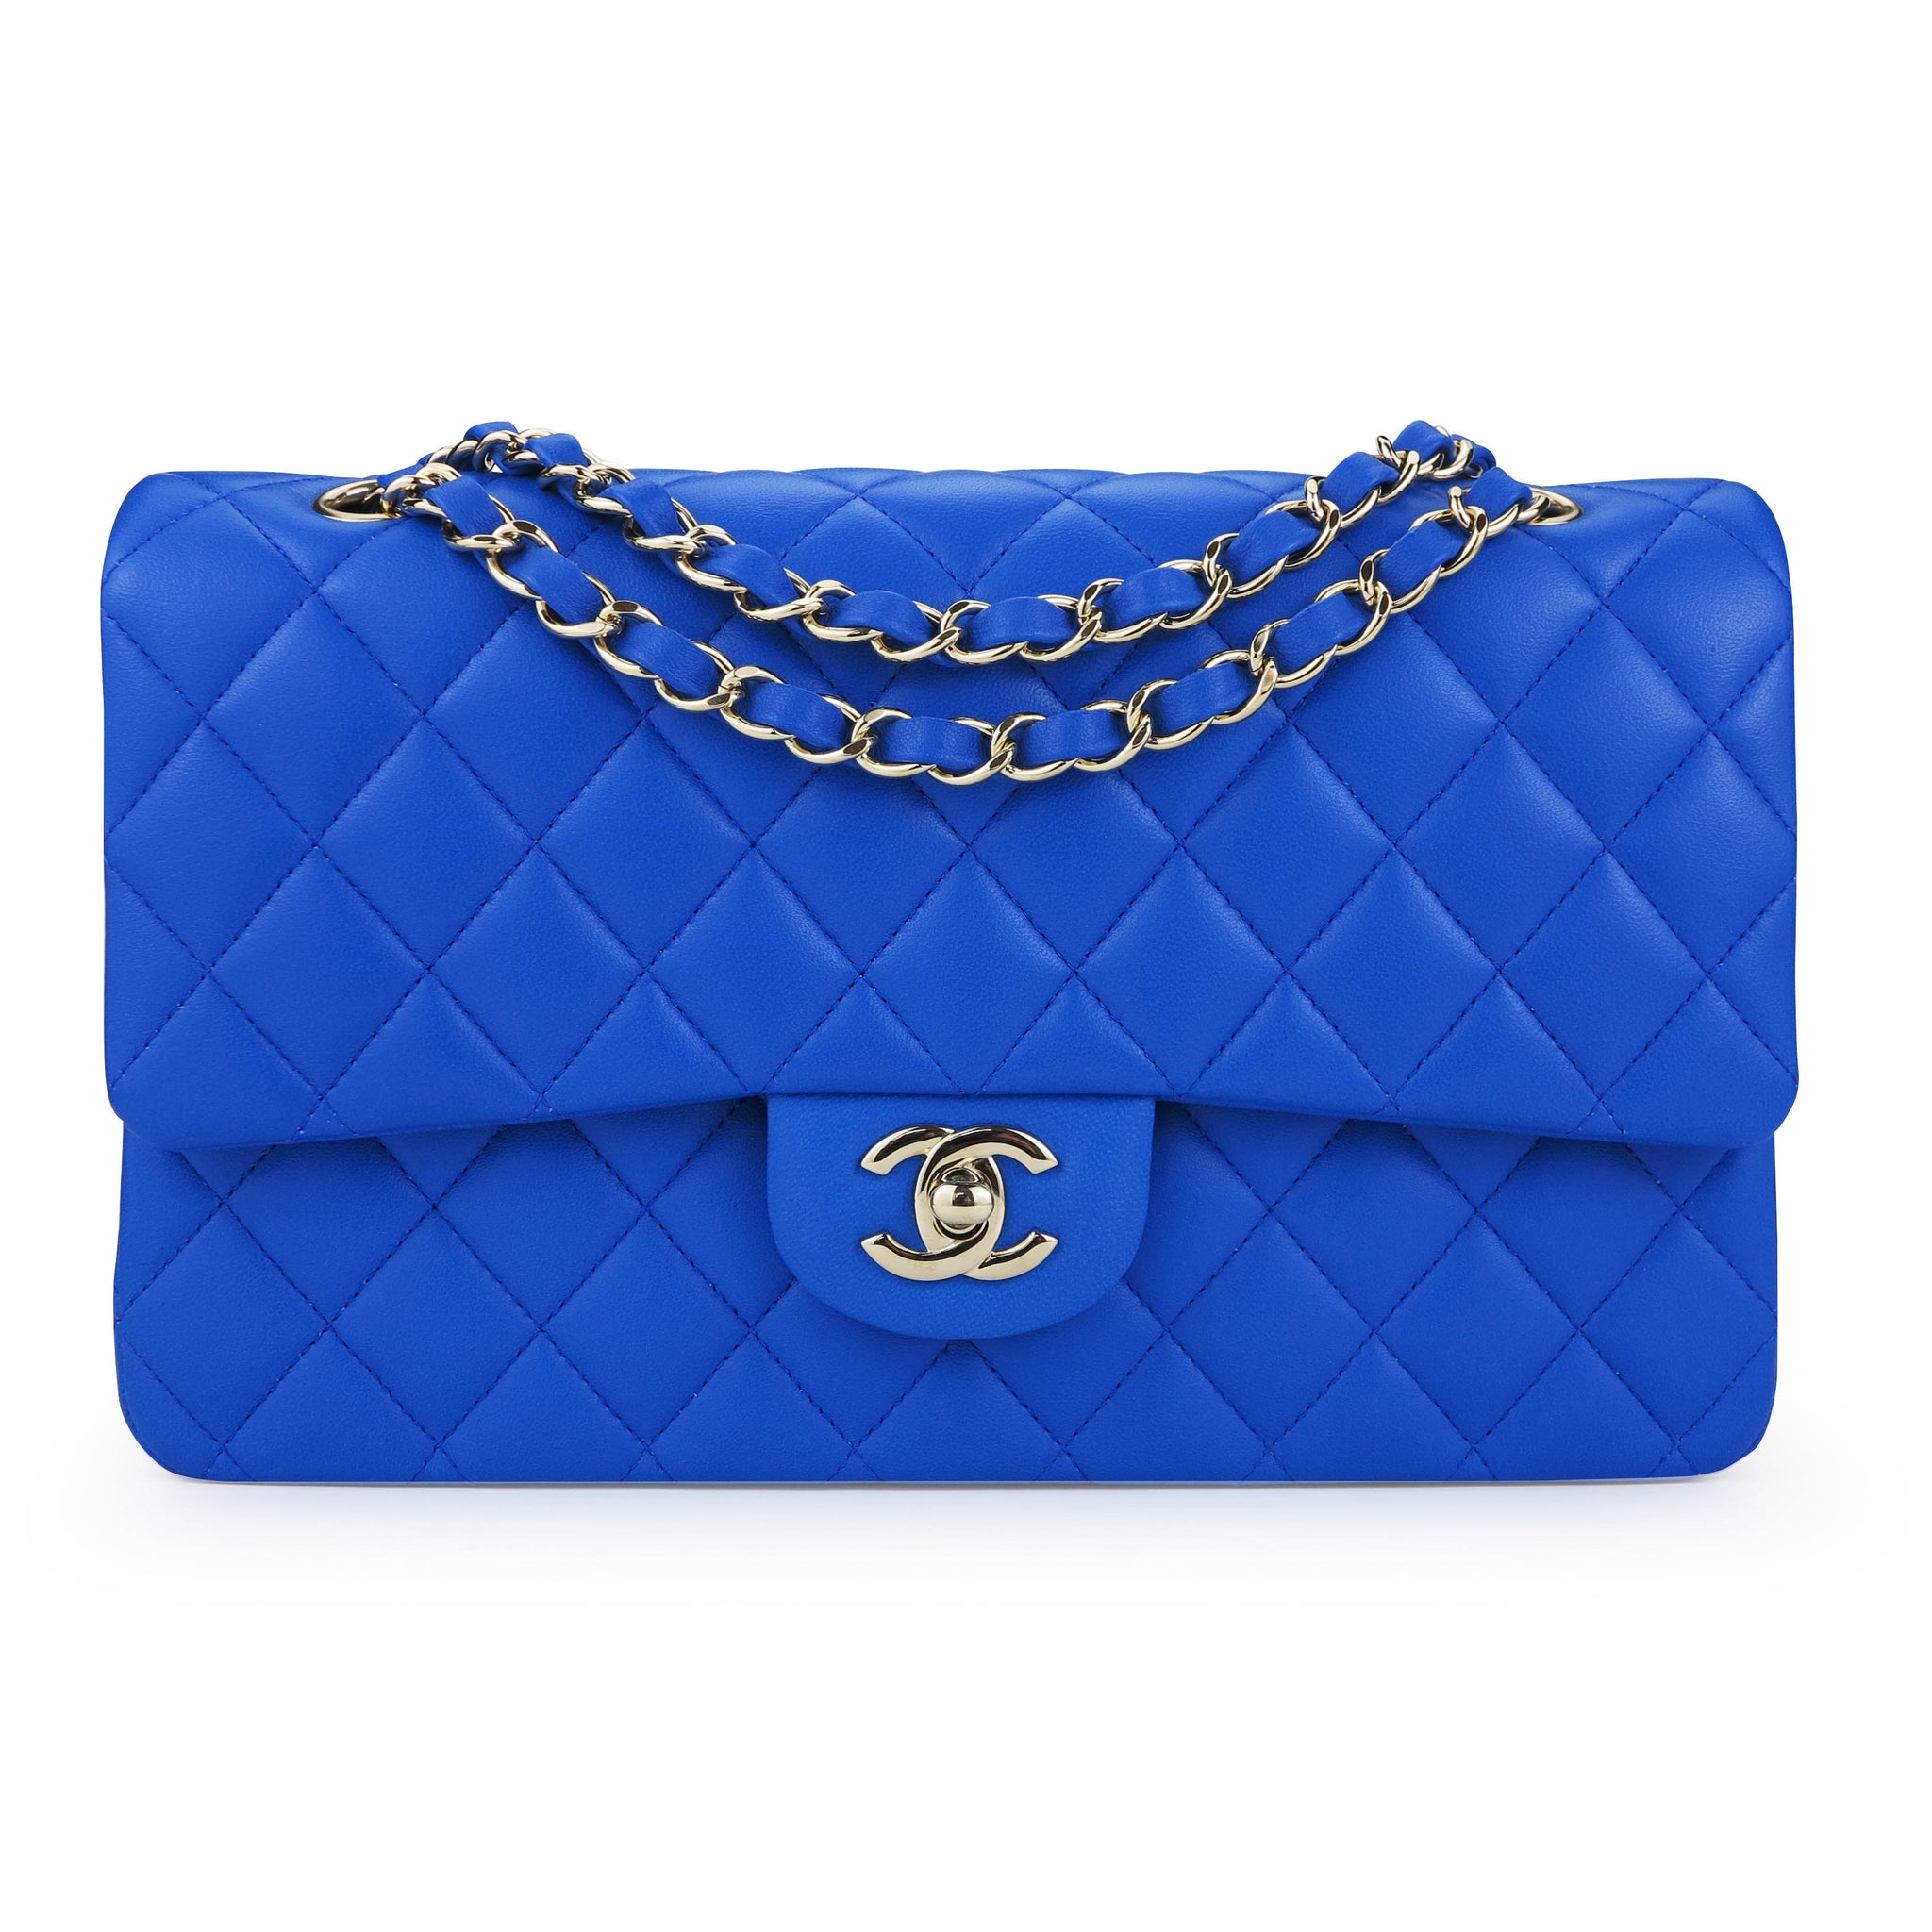 A Timeline of Classic Chanel Bag Price Increases Over The Years  BOPF   Business of Preloved Fashion